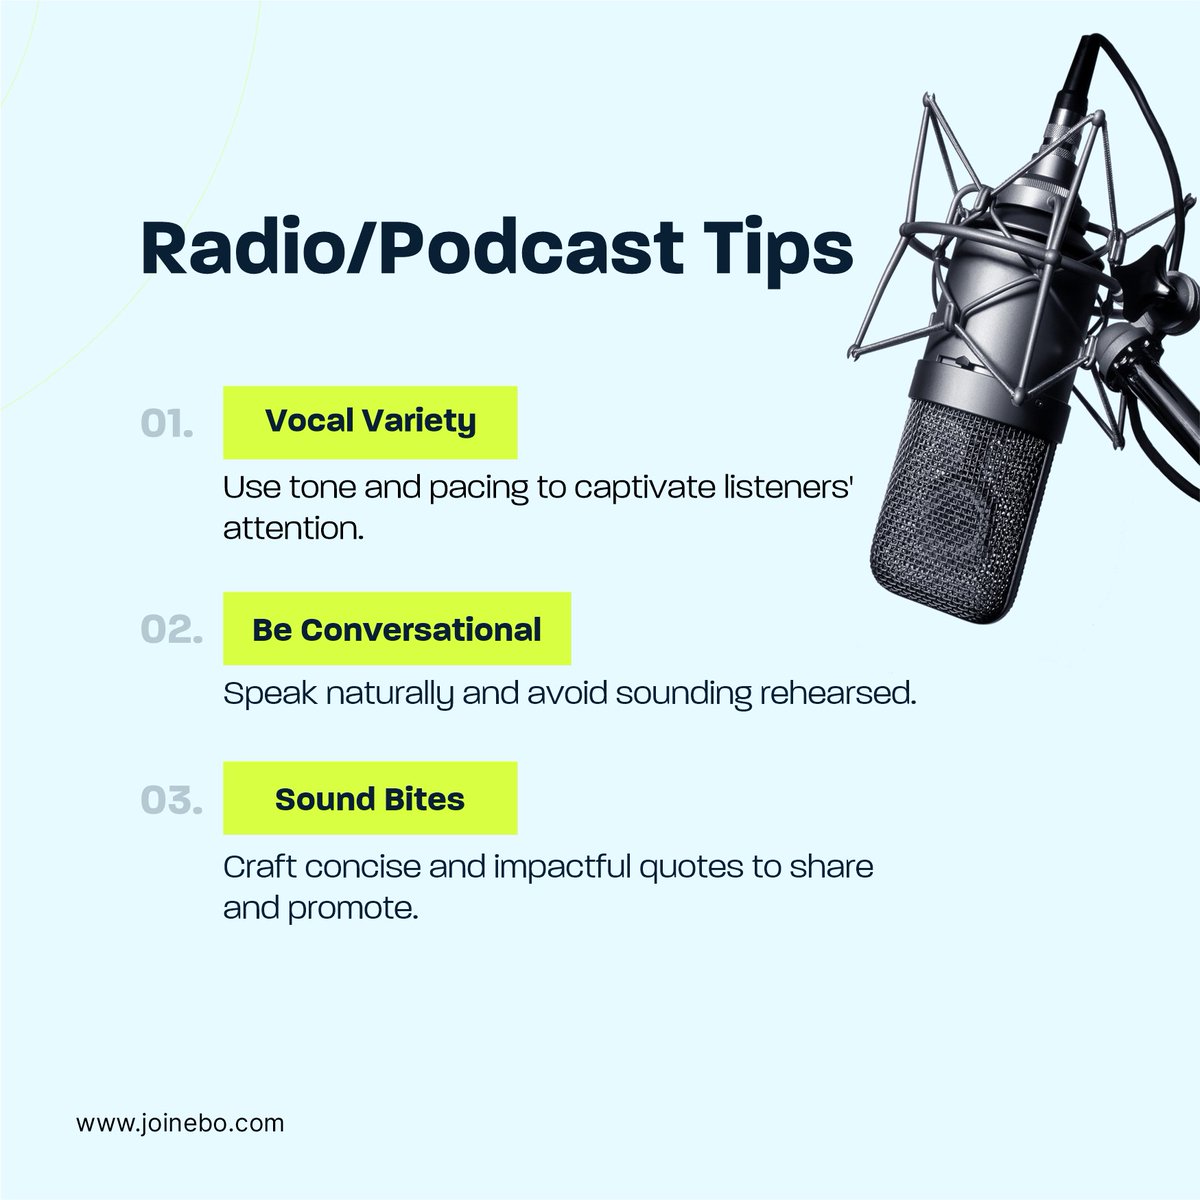 Land Your Next Radio or Podcast Gig with These Tips.

Want more tips on conquering media appearances?  Leave a comment below with your biggest media interview challenge and let's chat!

#MediaTraining #SubjectMatterExpert #PodcastTips #RadioInterview